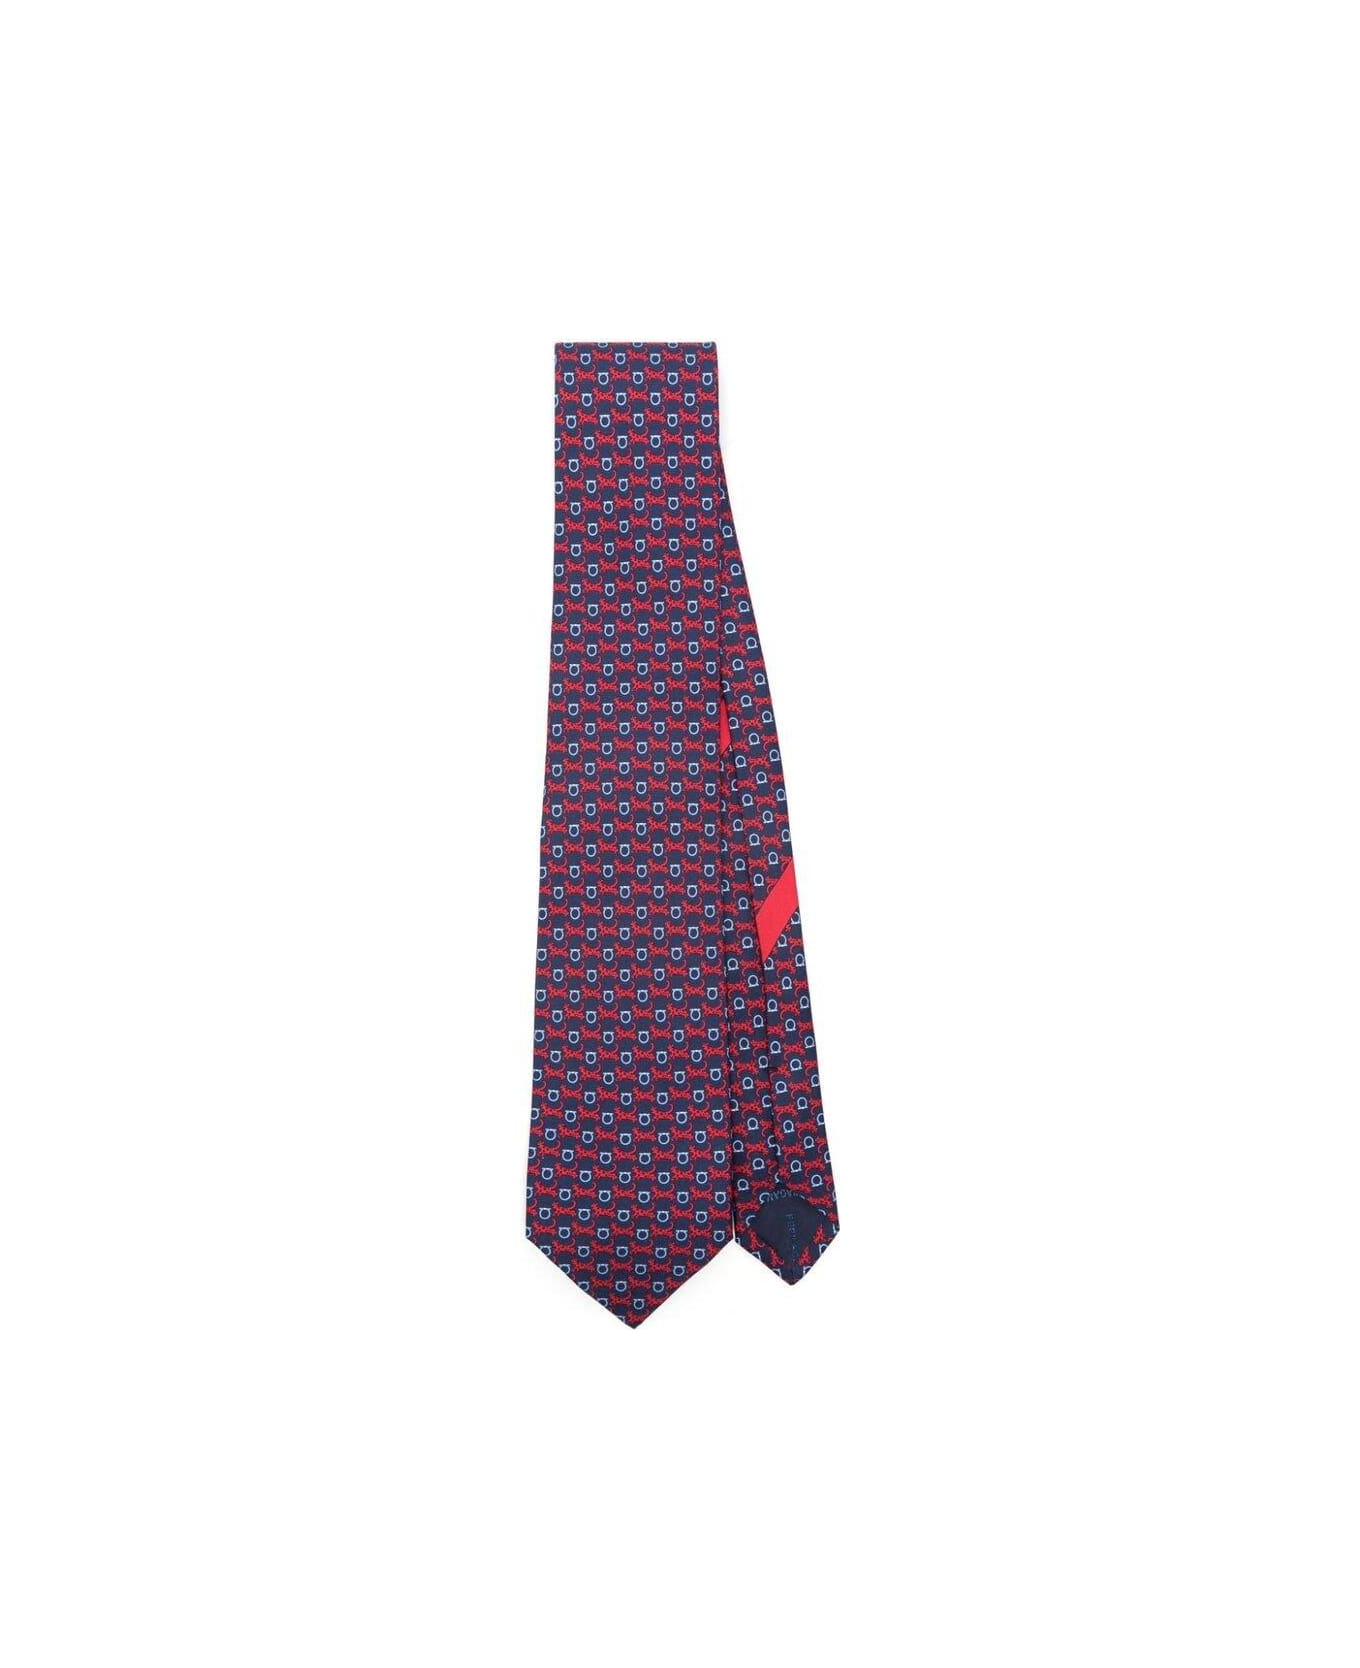 Ferragamo All-over Patterned Tie - BLUE/RED